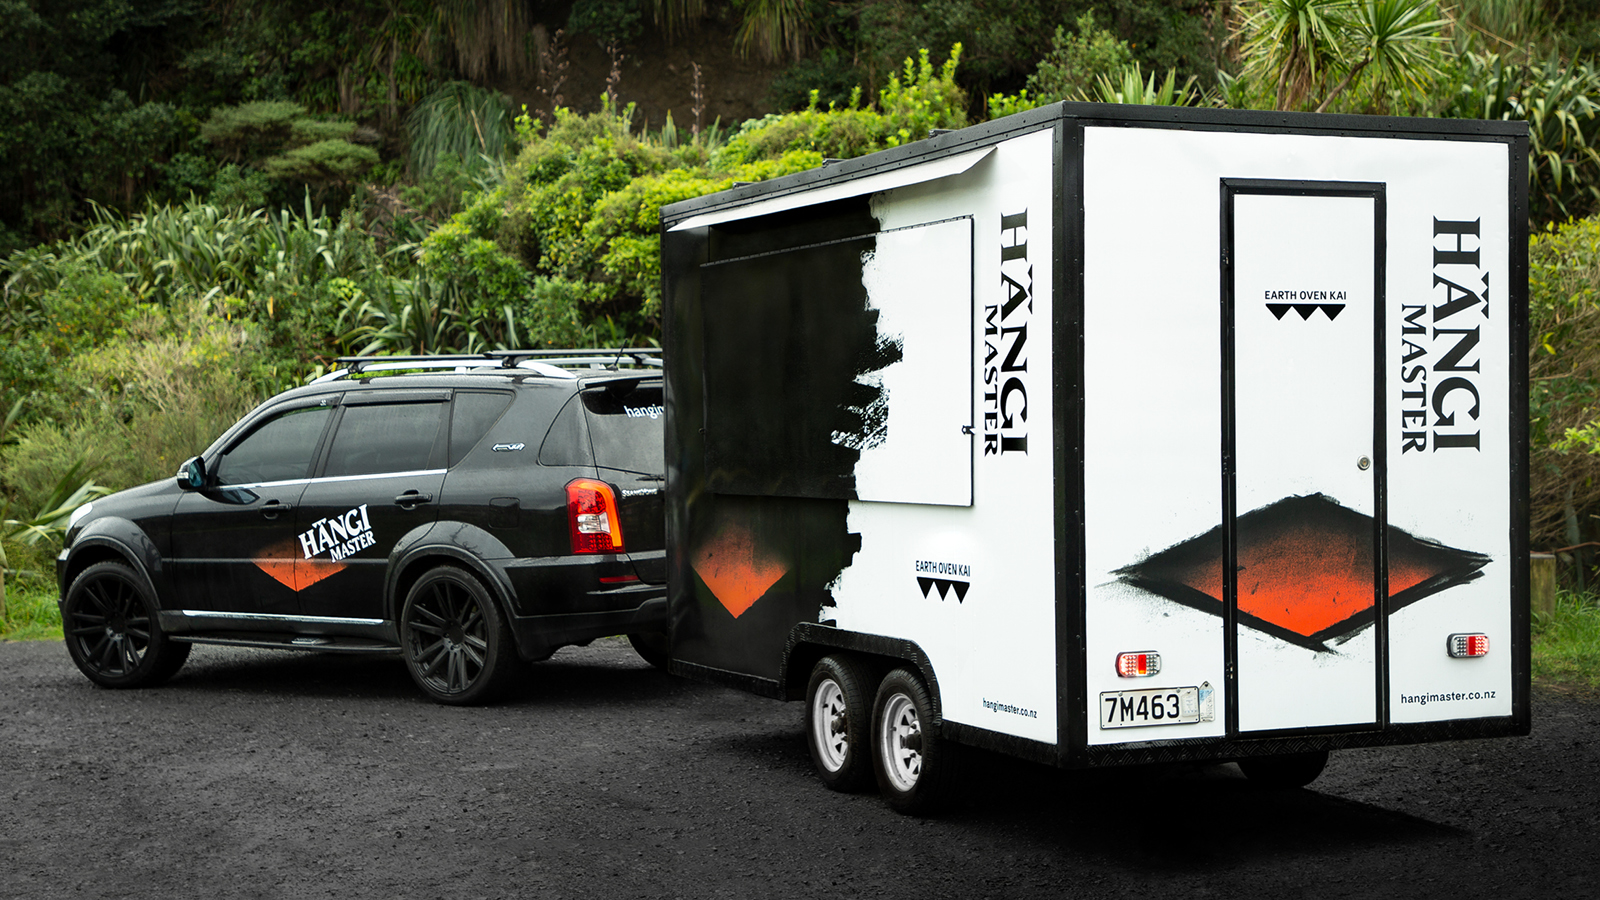 The Hangi Master foodtruck and branded vehicle